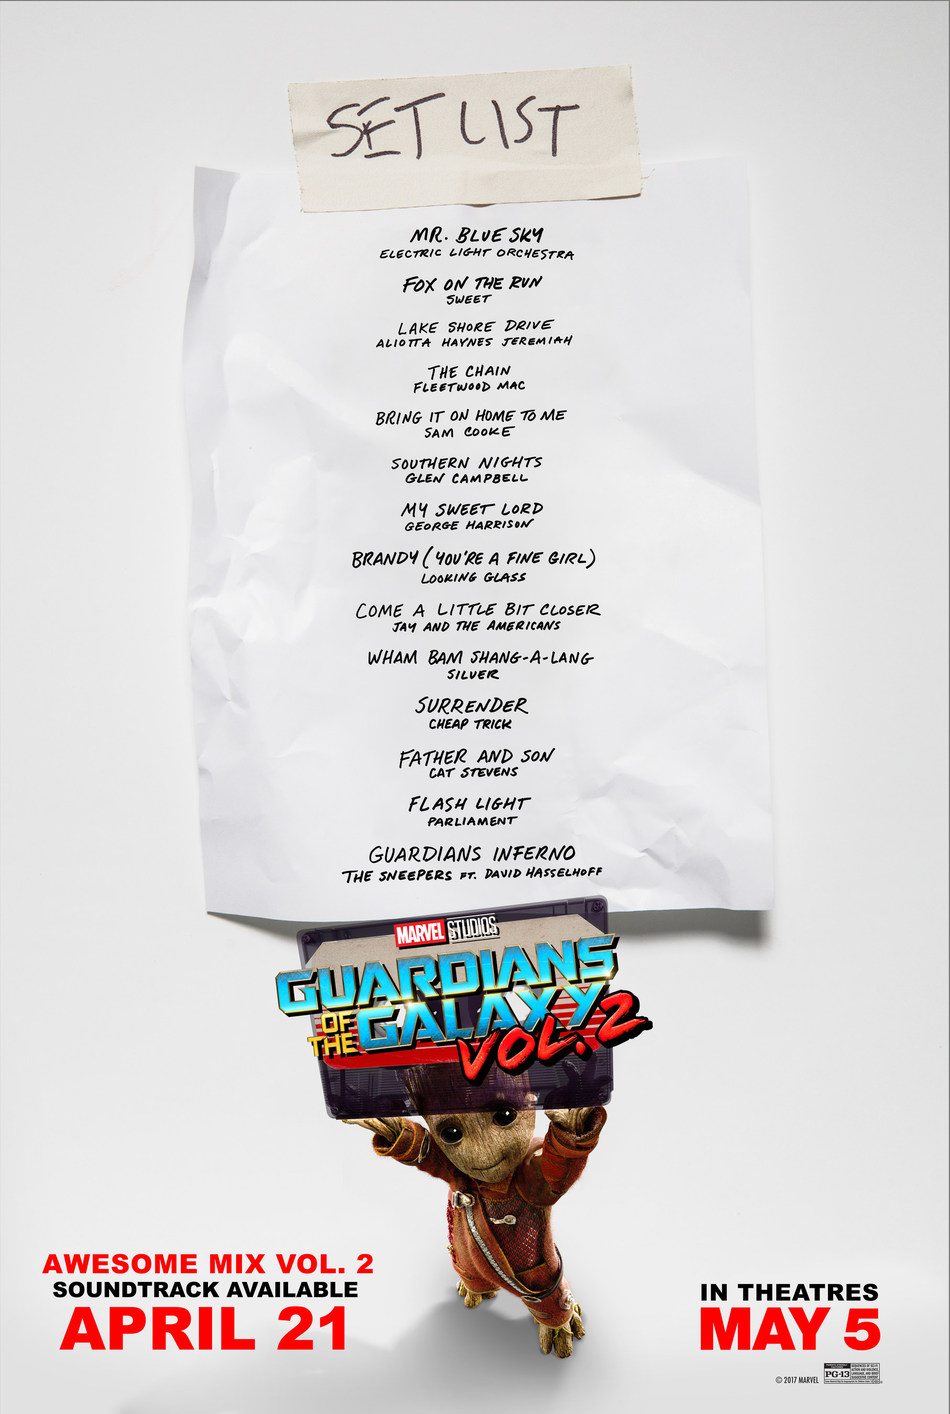 Guardians of the Galaxy Vol. 2: Awesome Mix Vol. 2 Track List